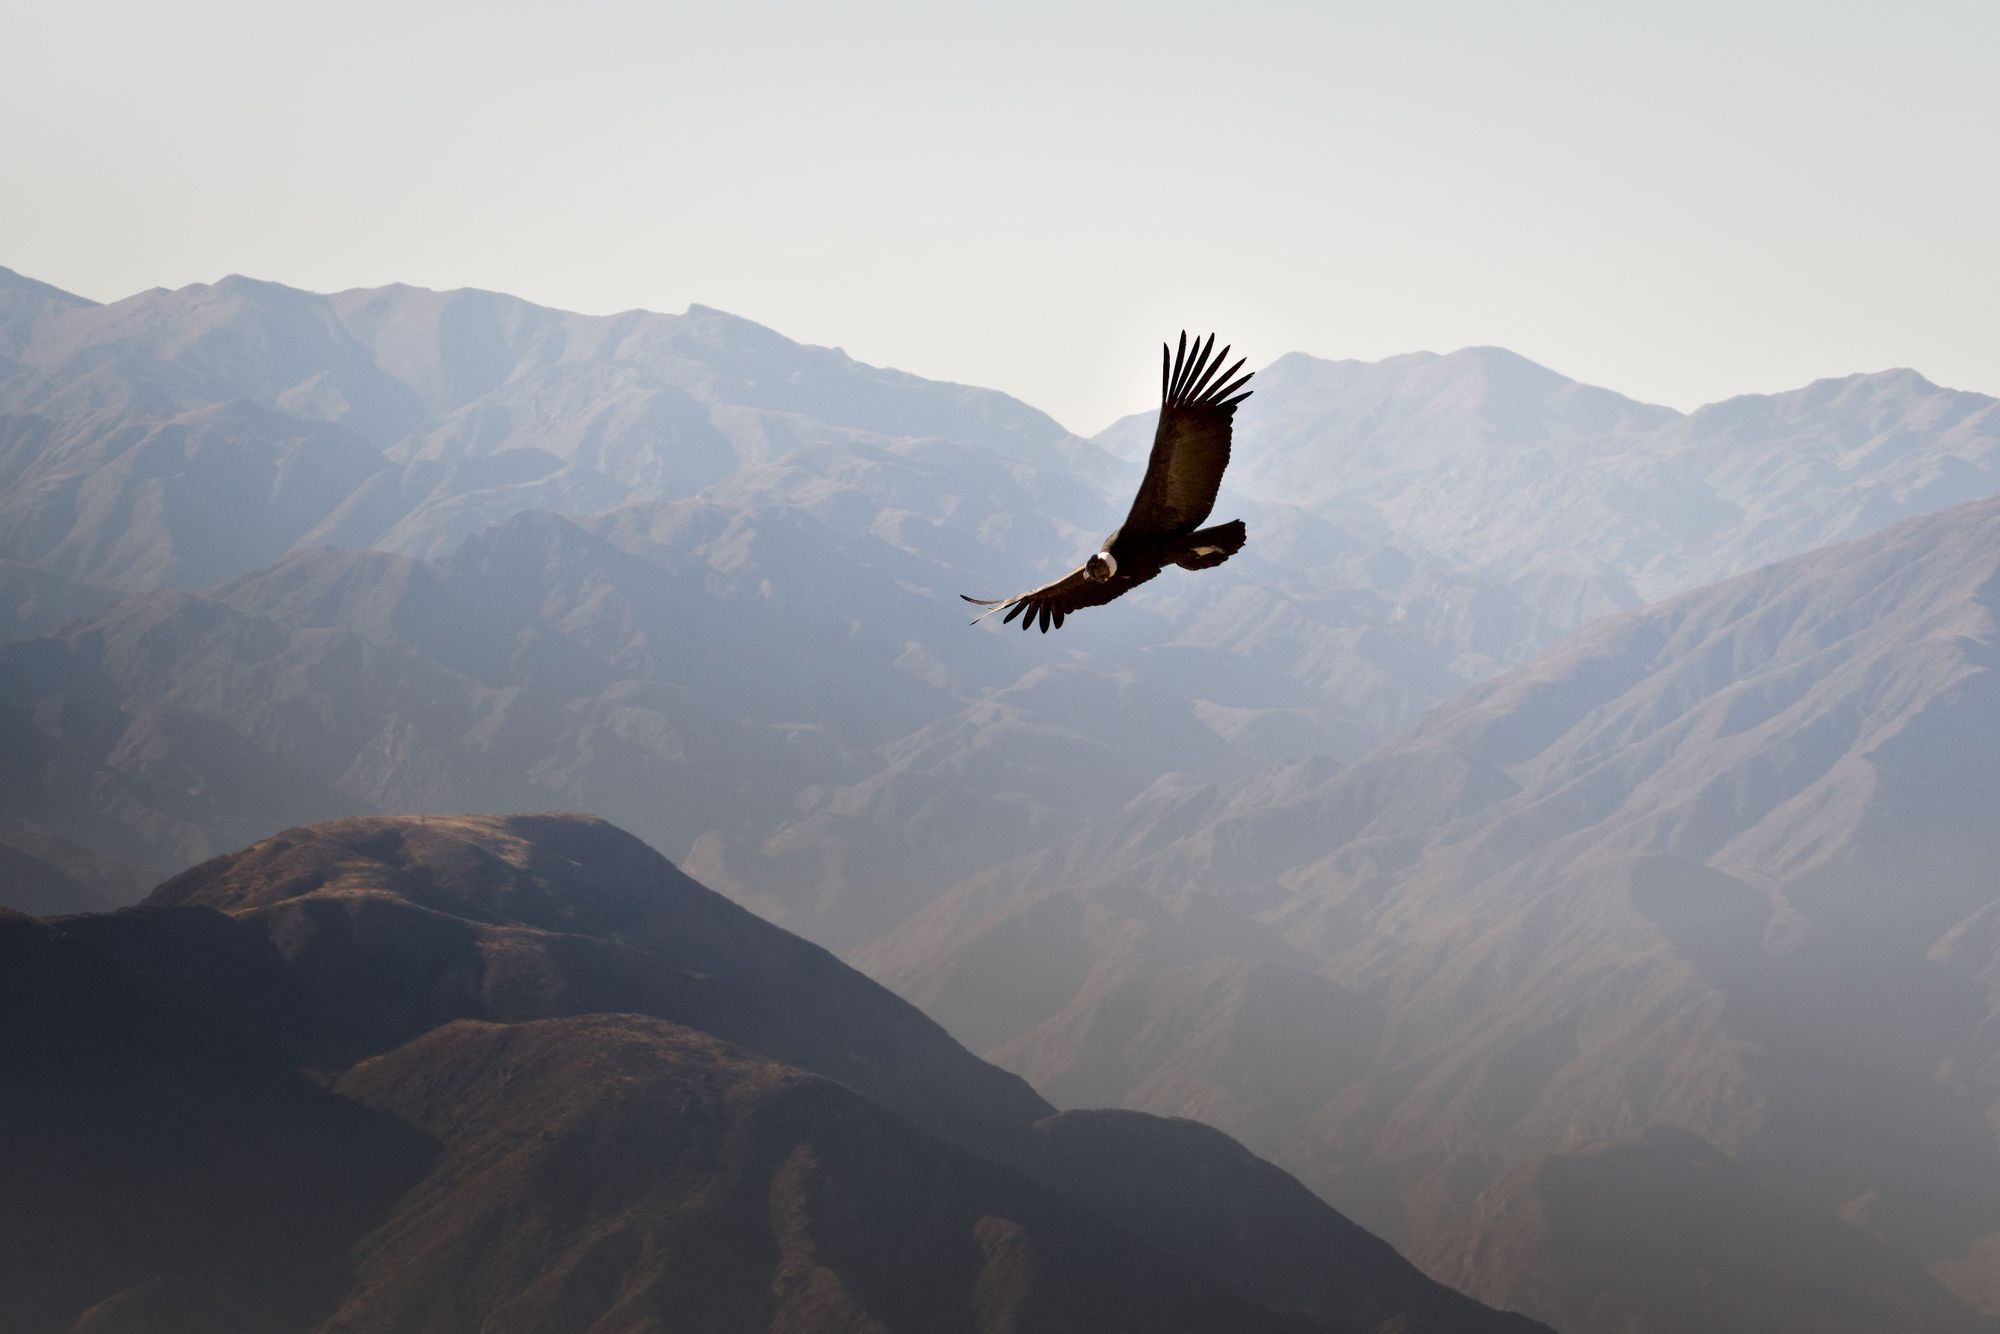 An Andean Condor soars above the mountains of Chilean Patagonia, scavenging for food below. Photo: Getty